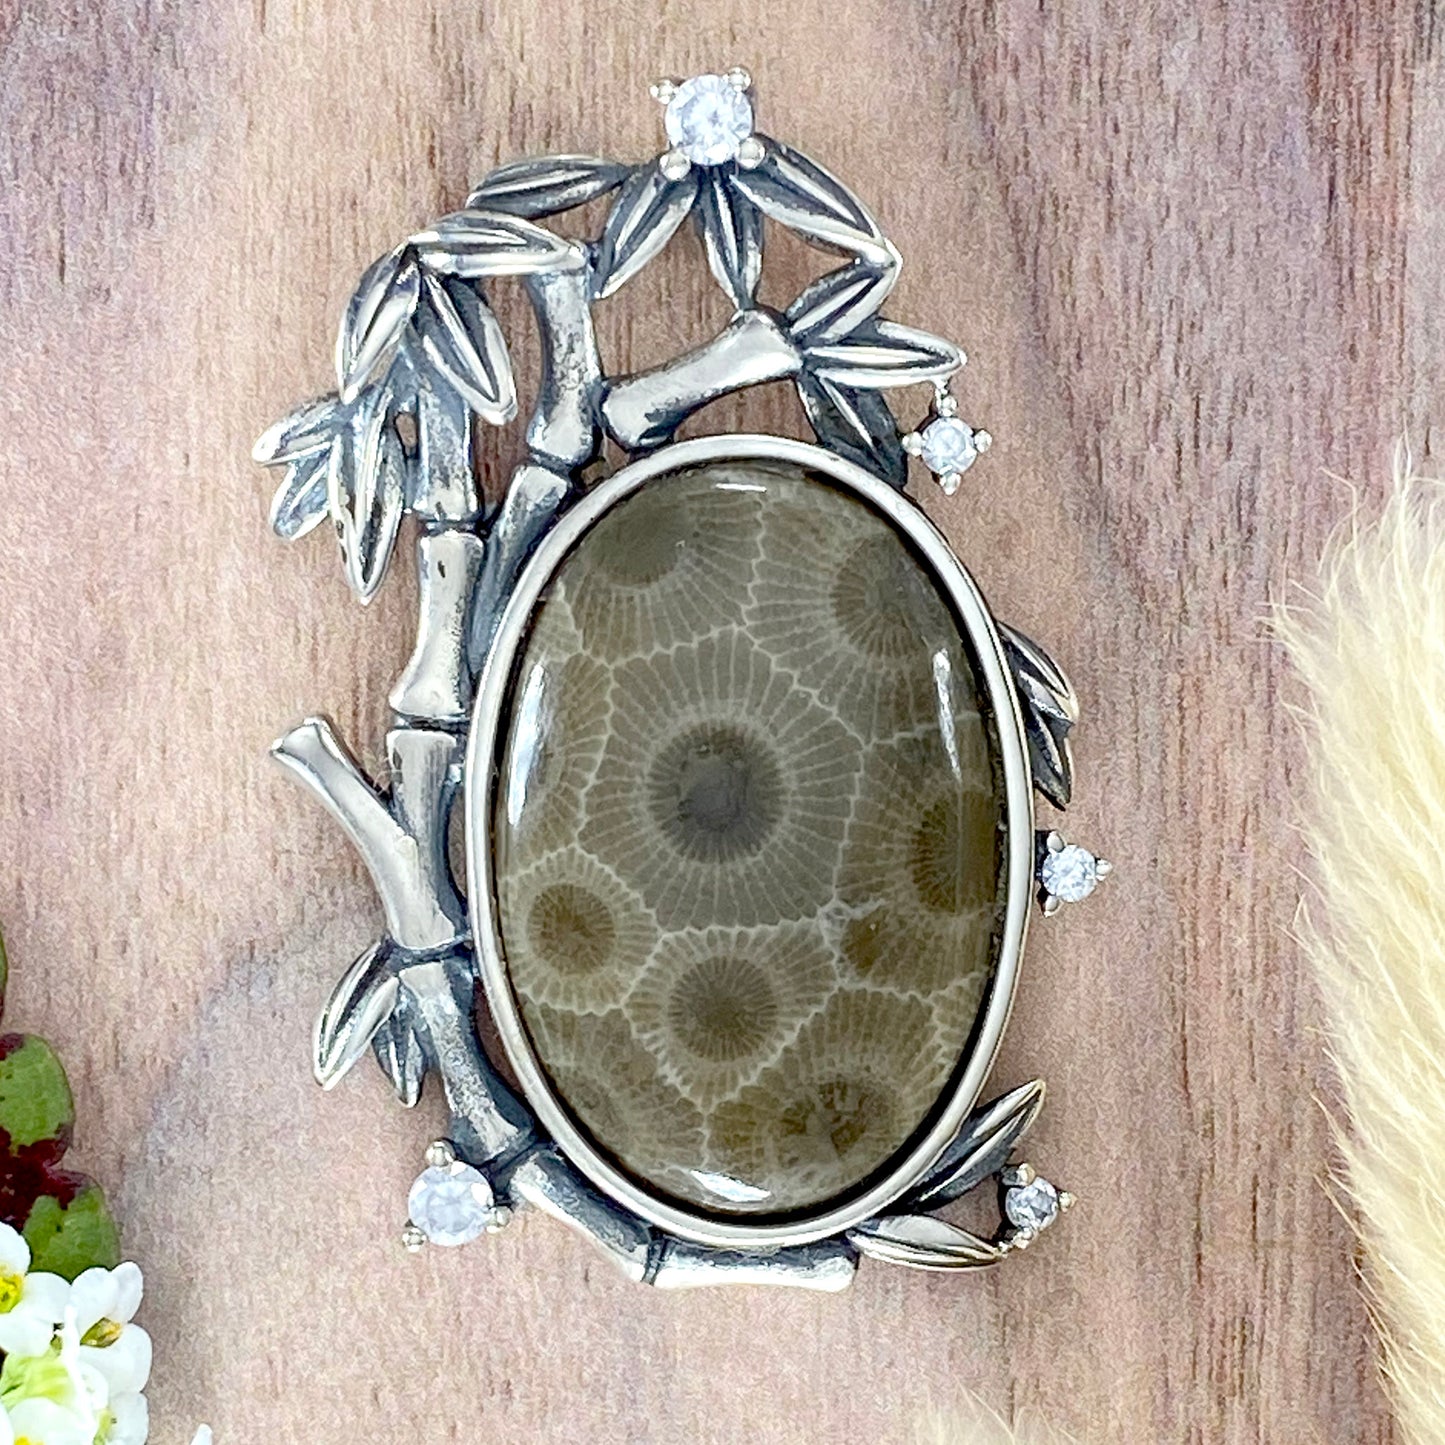 Petoskey Stone Pendant Front View V - Stone Treasures by the Lake